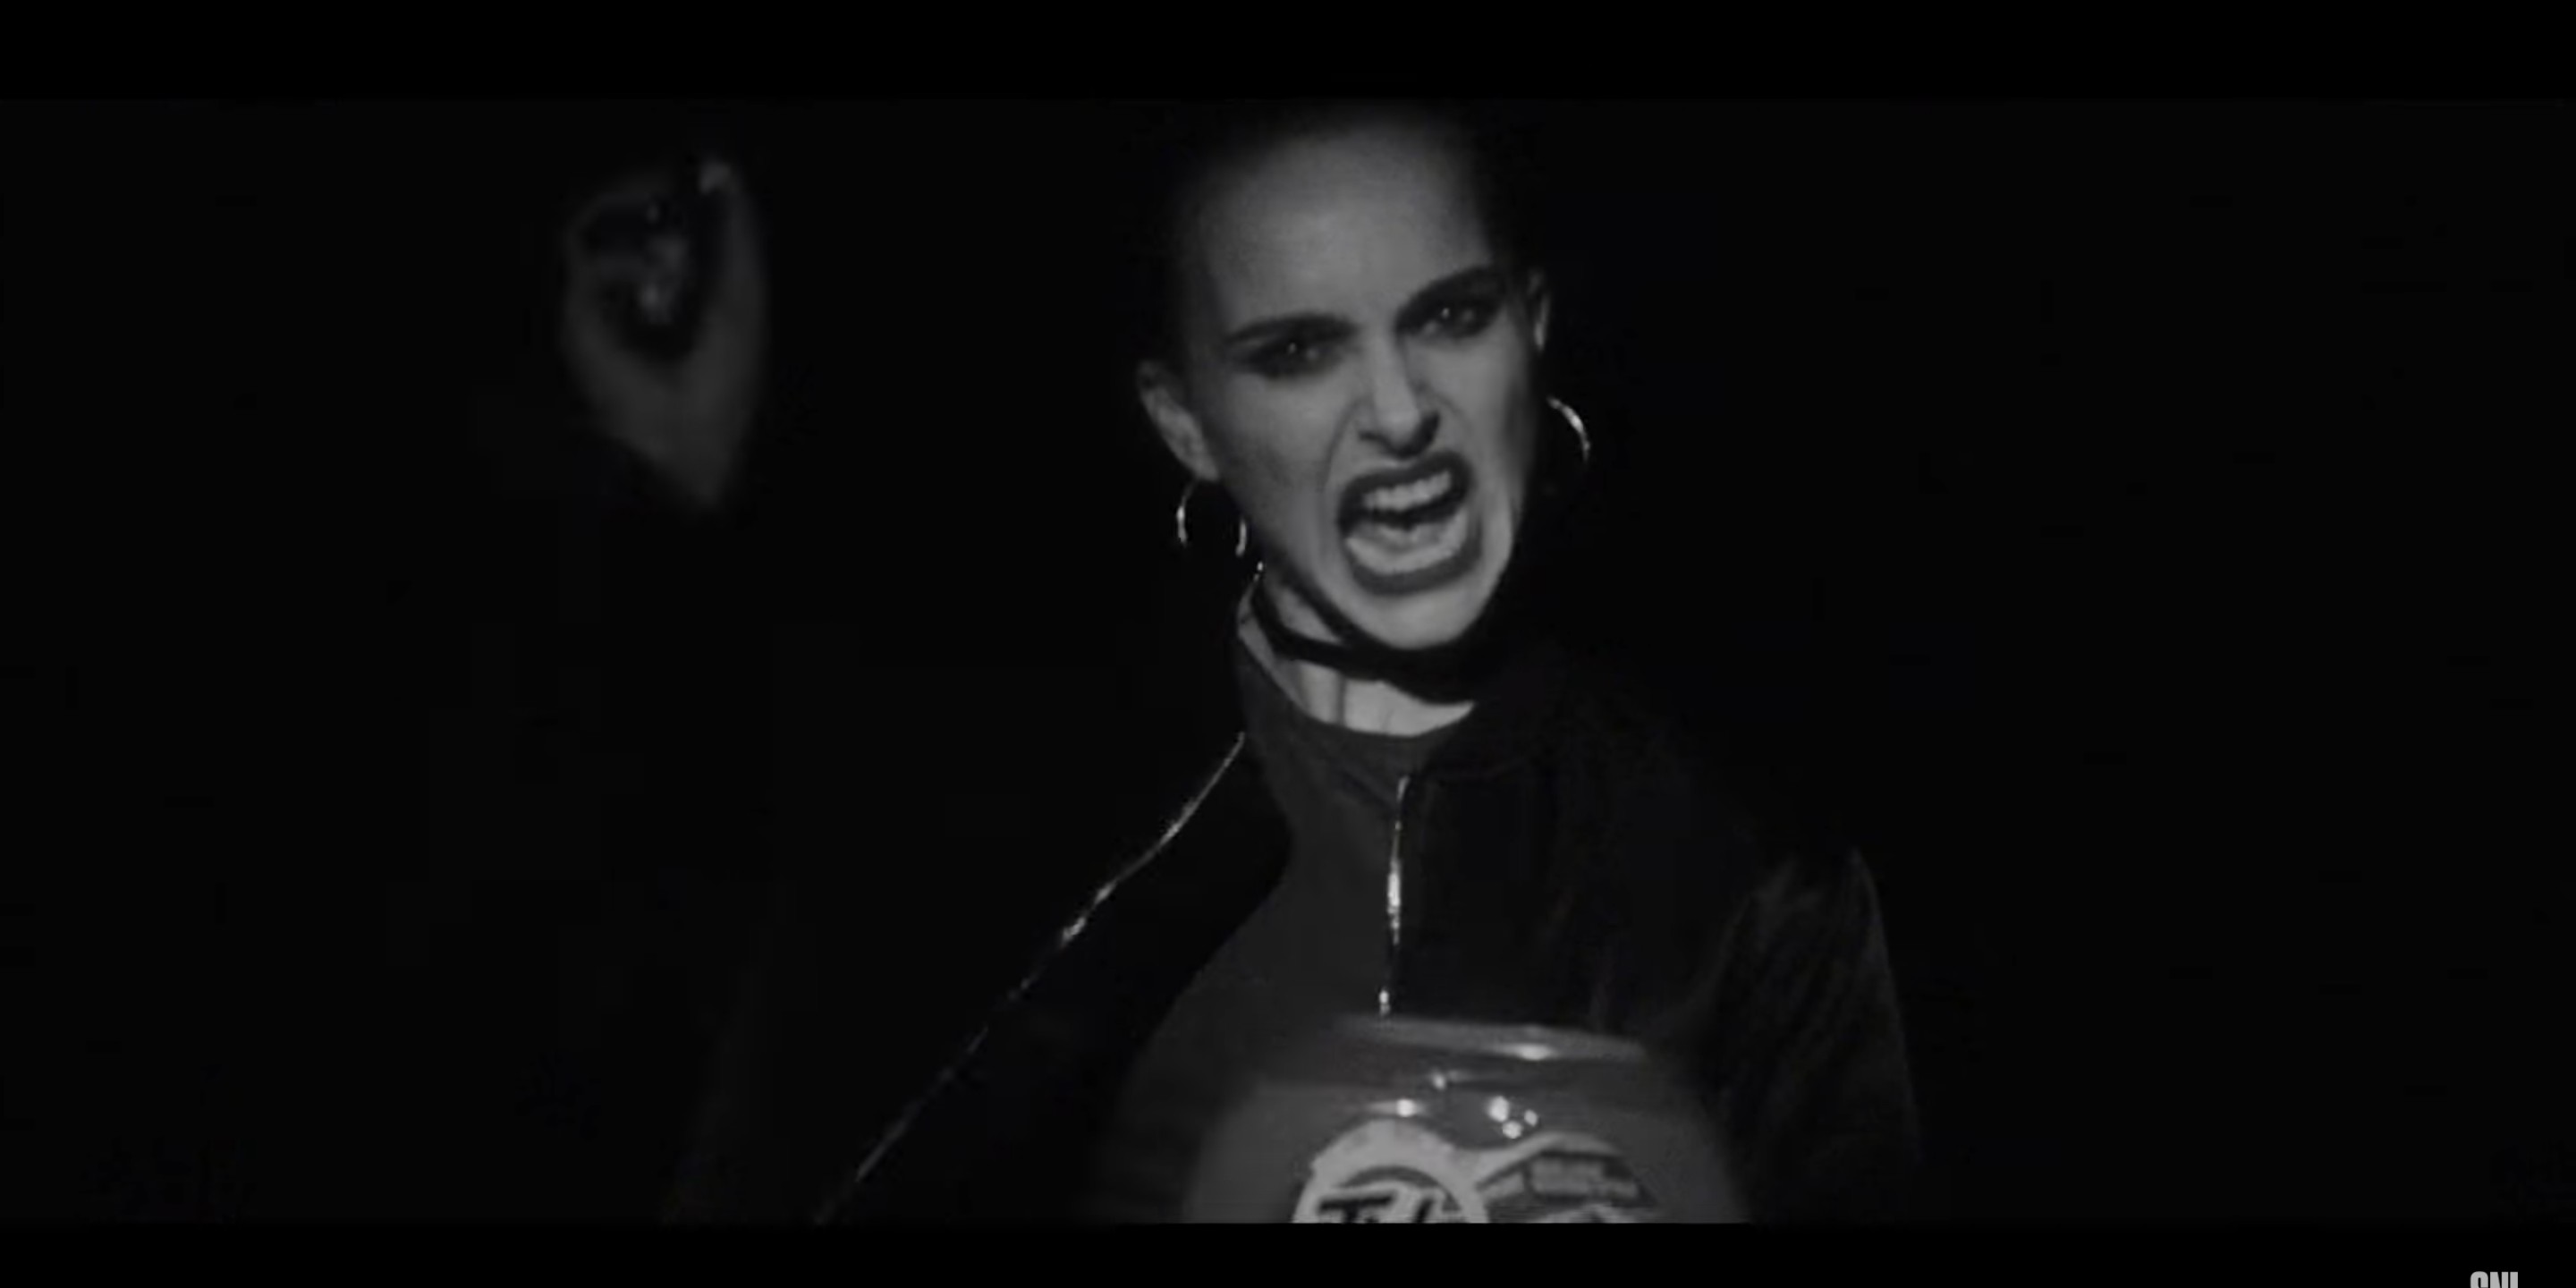 Natalie Portman returns to Saturday Night Live with another foul-mouthed, hilarious rap – watch